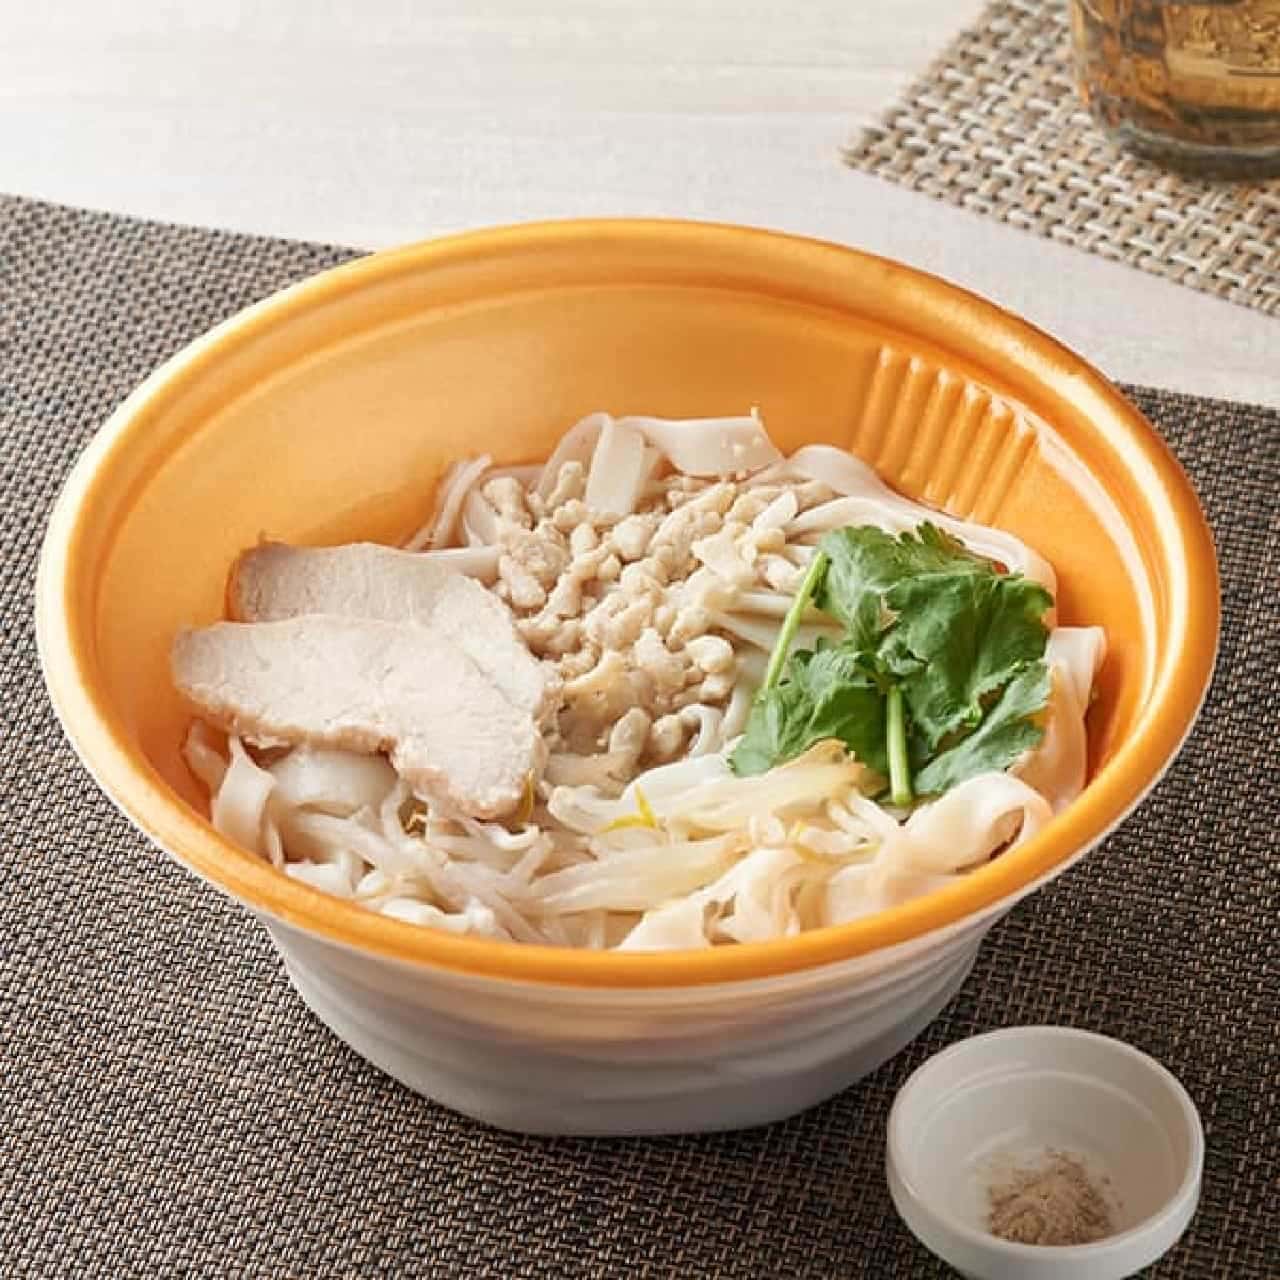 FamilyMart "Chicken Rice Noodle supervised by Mango Tree Cafe